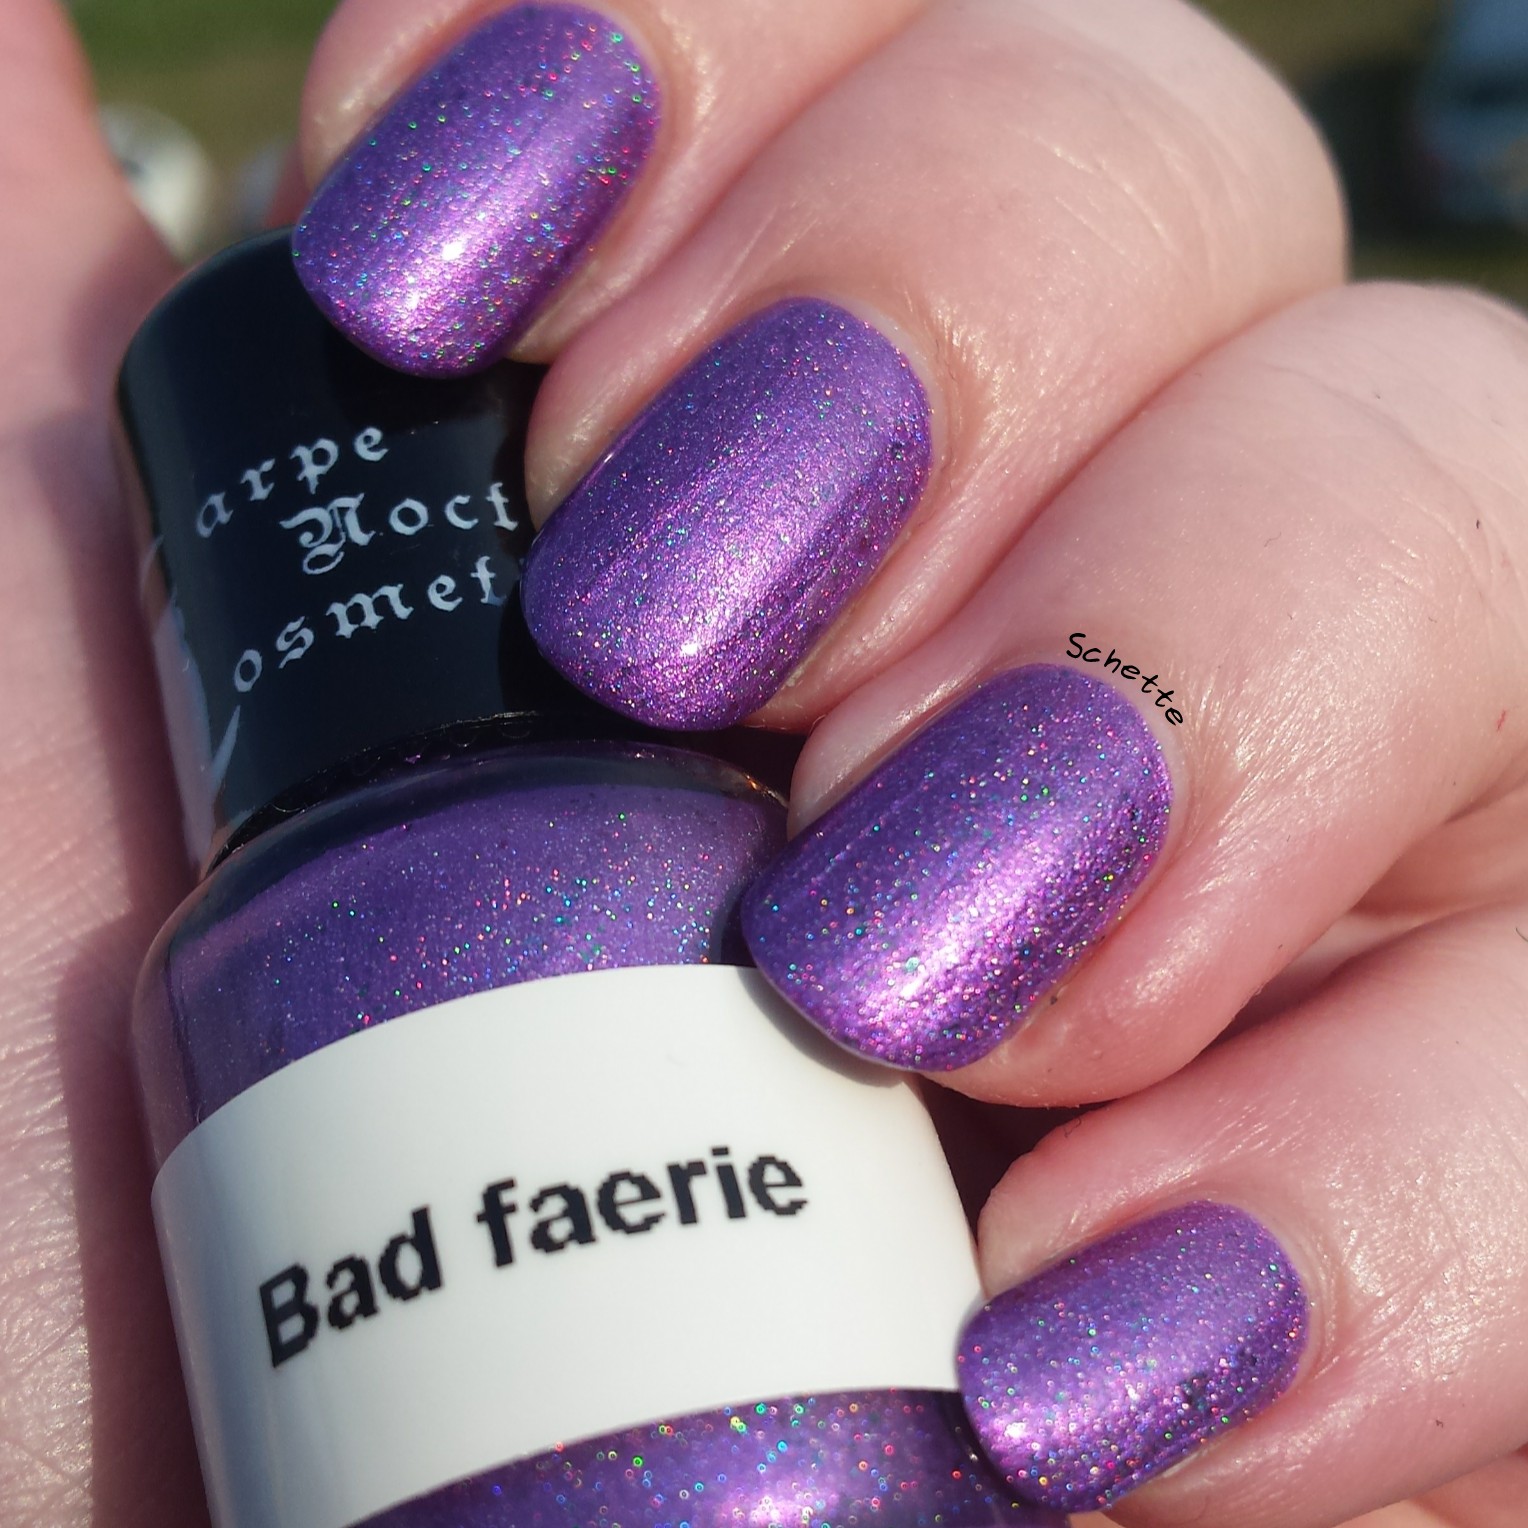 Carpe Noctem Cosmetics - I come from the forest, Bad faerie